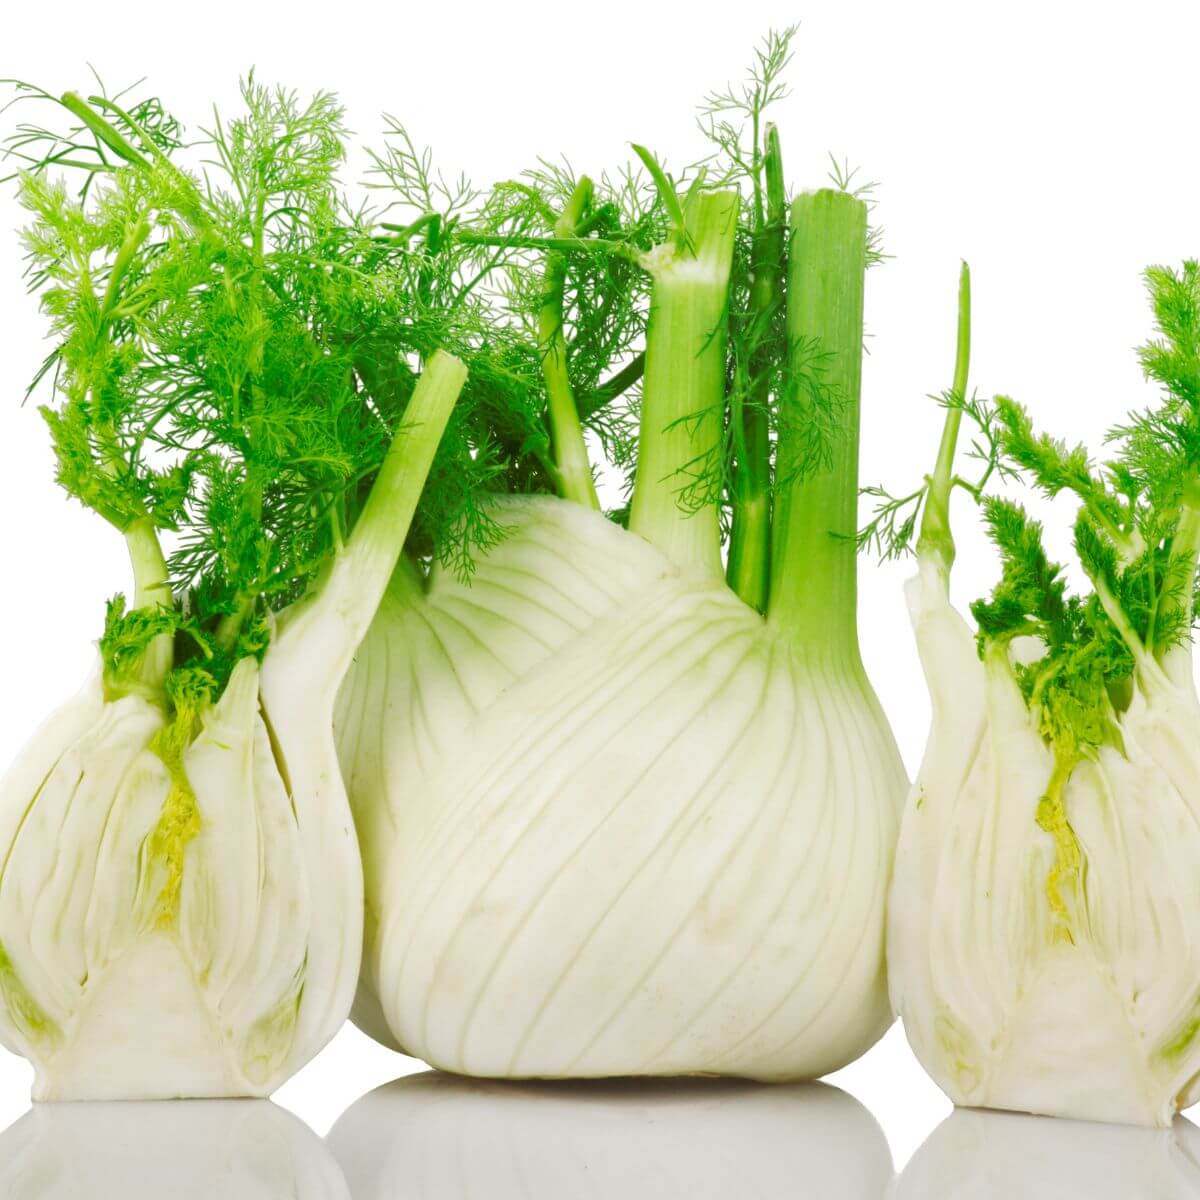 Is Fennel Healthy? What are the Benefits of Eating Fennel?